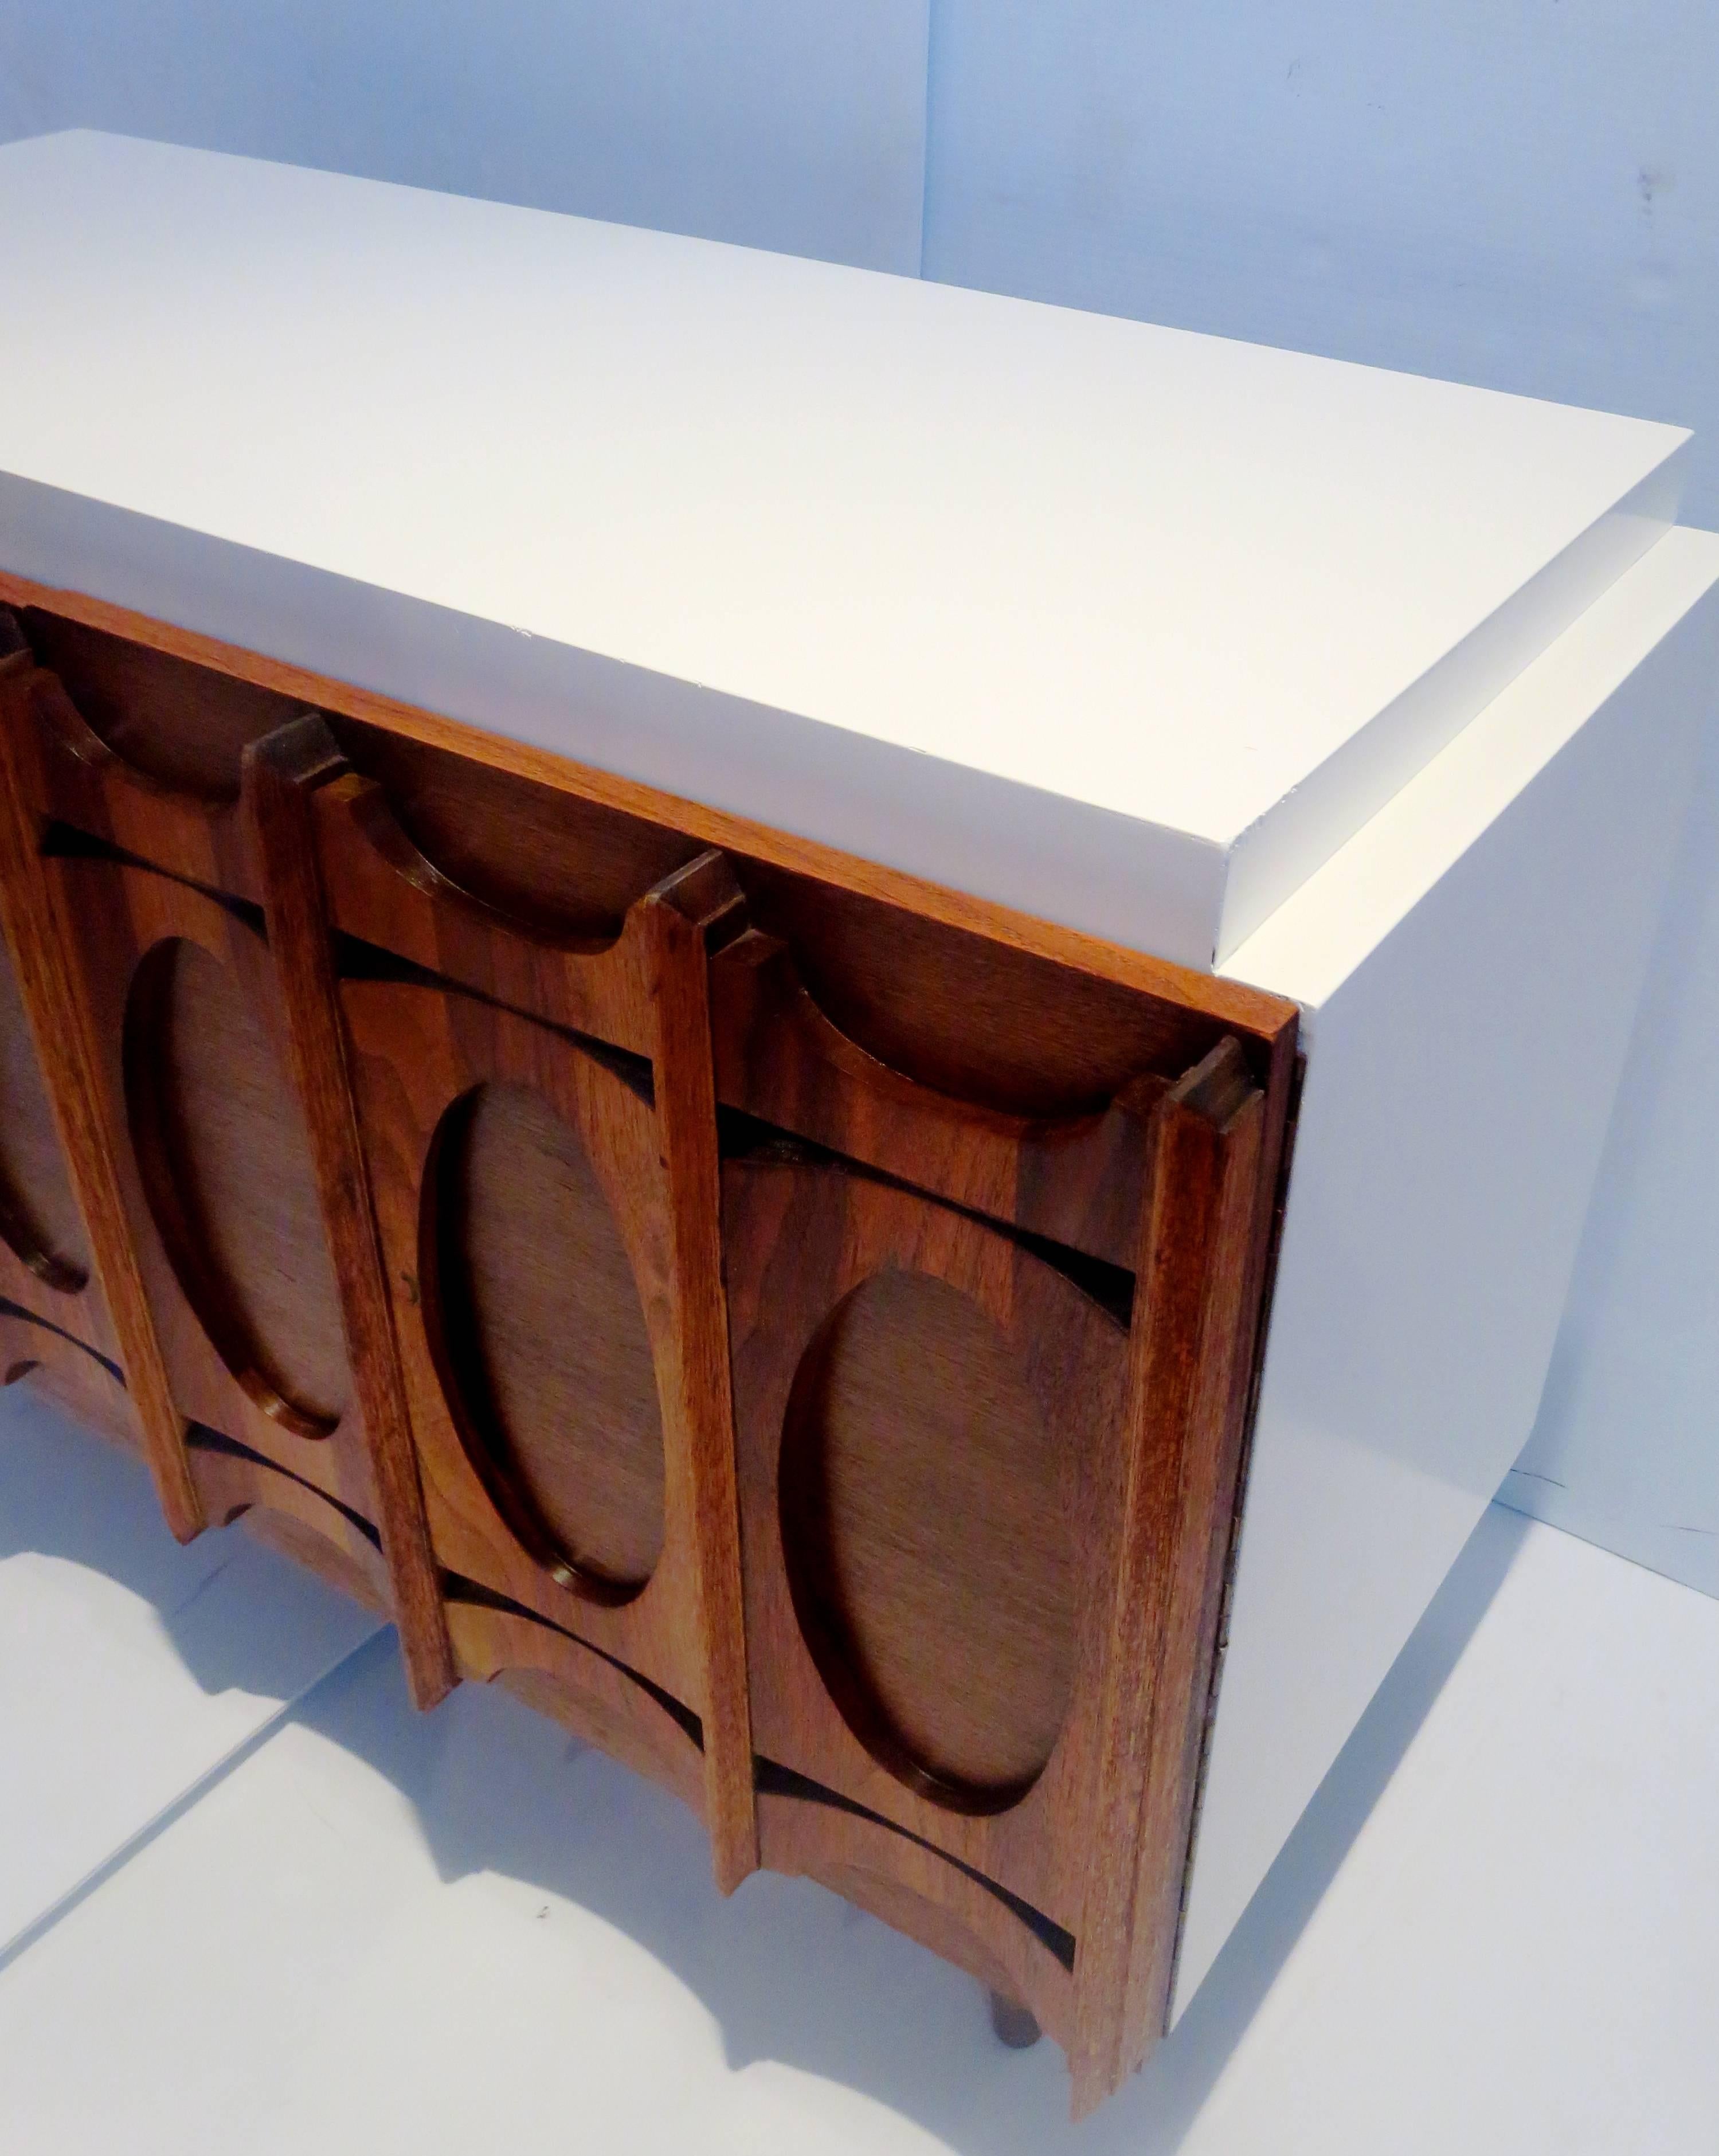 1950s American Modern Cabinet with Sculpted Walnut Facade and White Lacquer 2